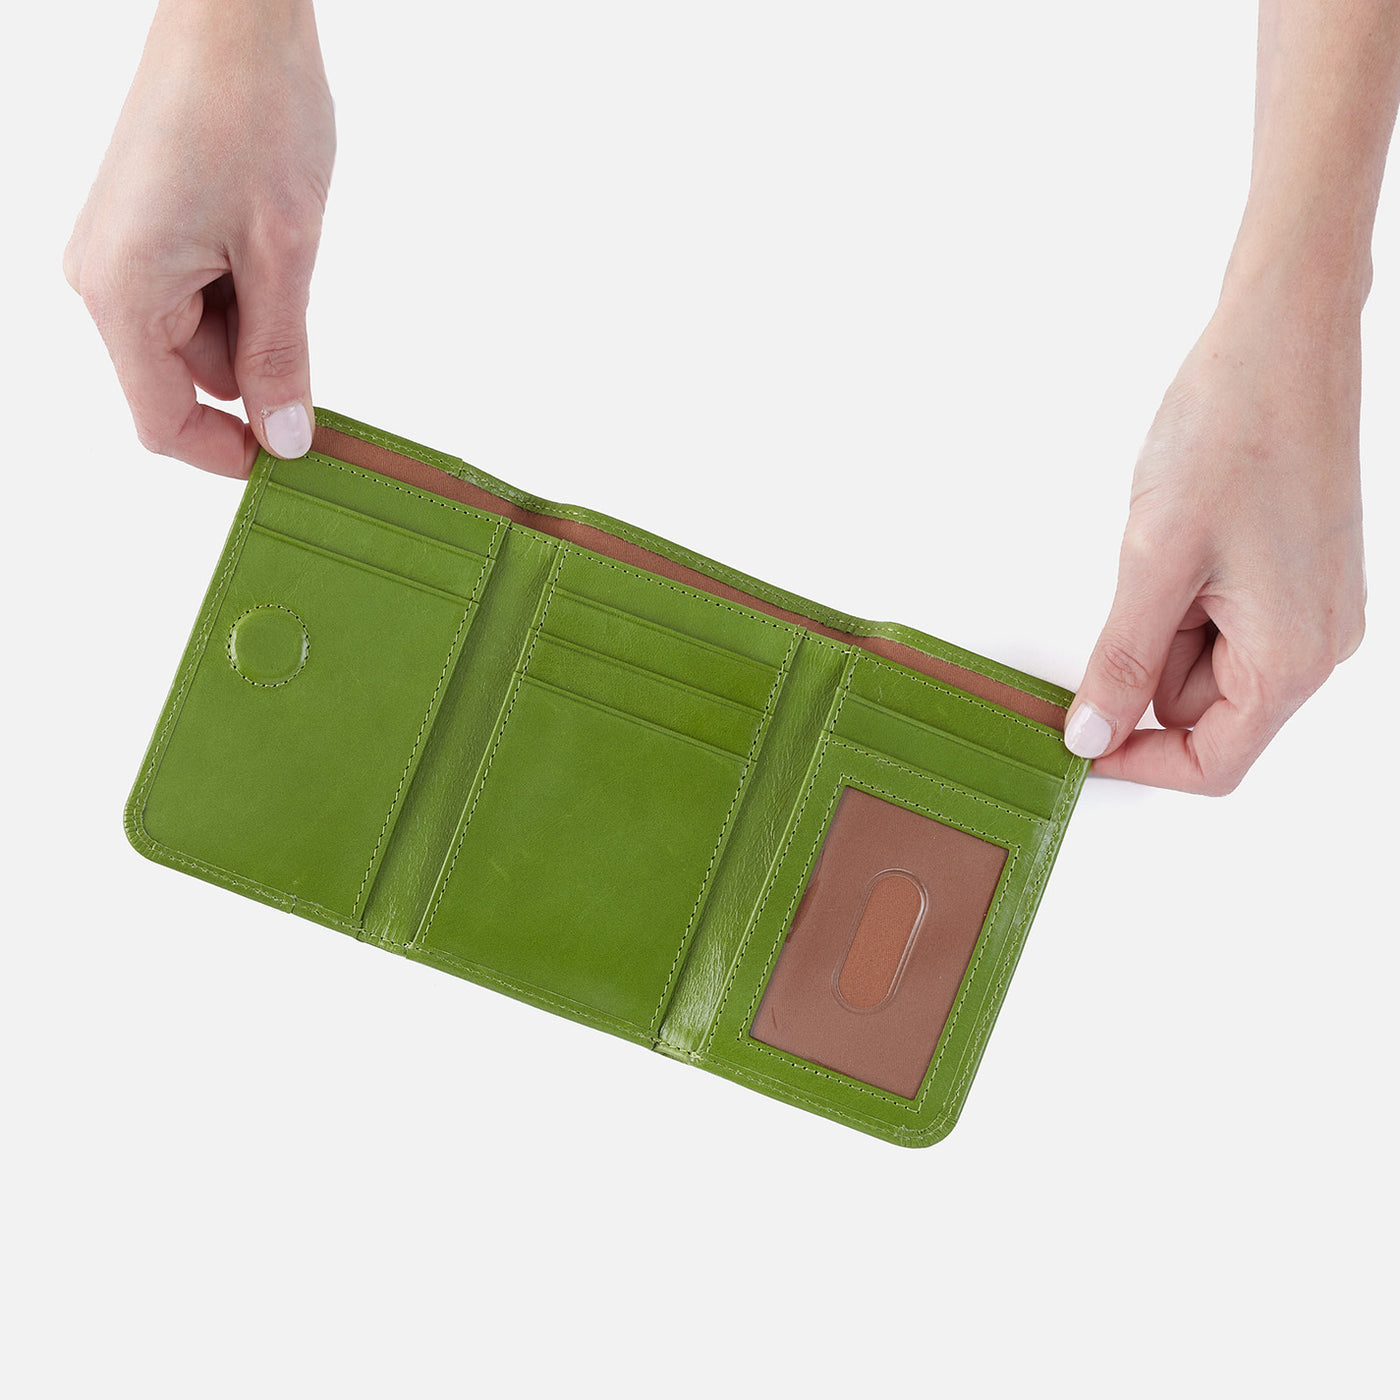 Jill Trifold Wallet in Polished Leather - Garden Green